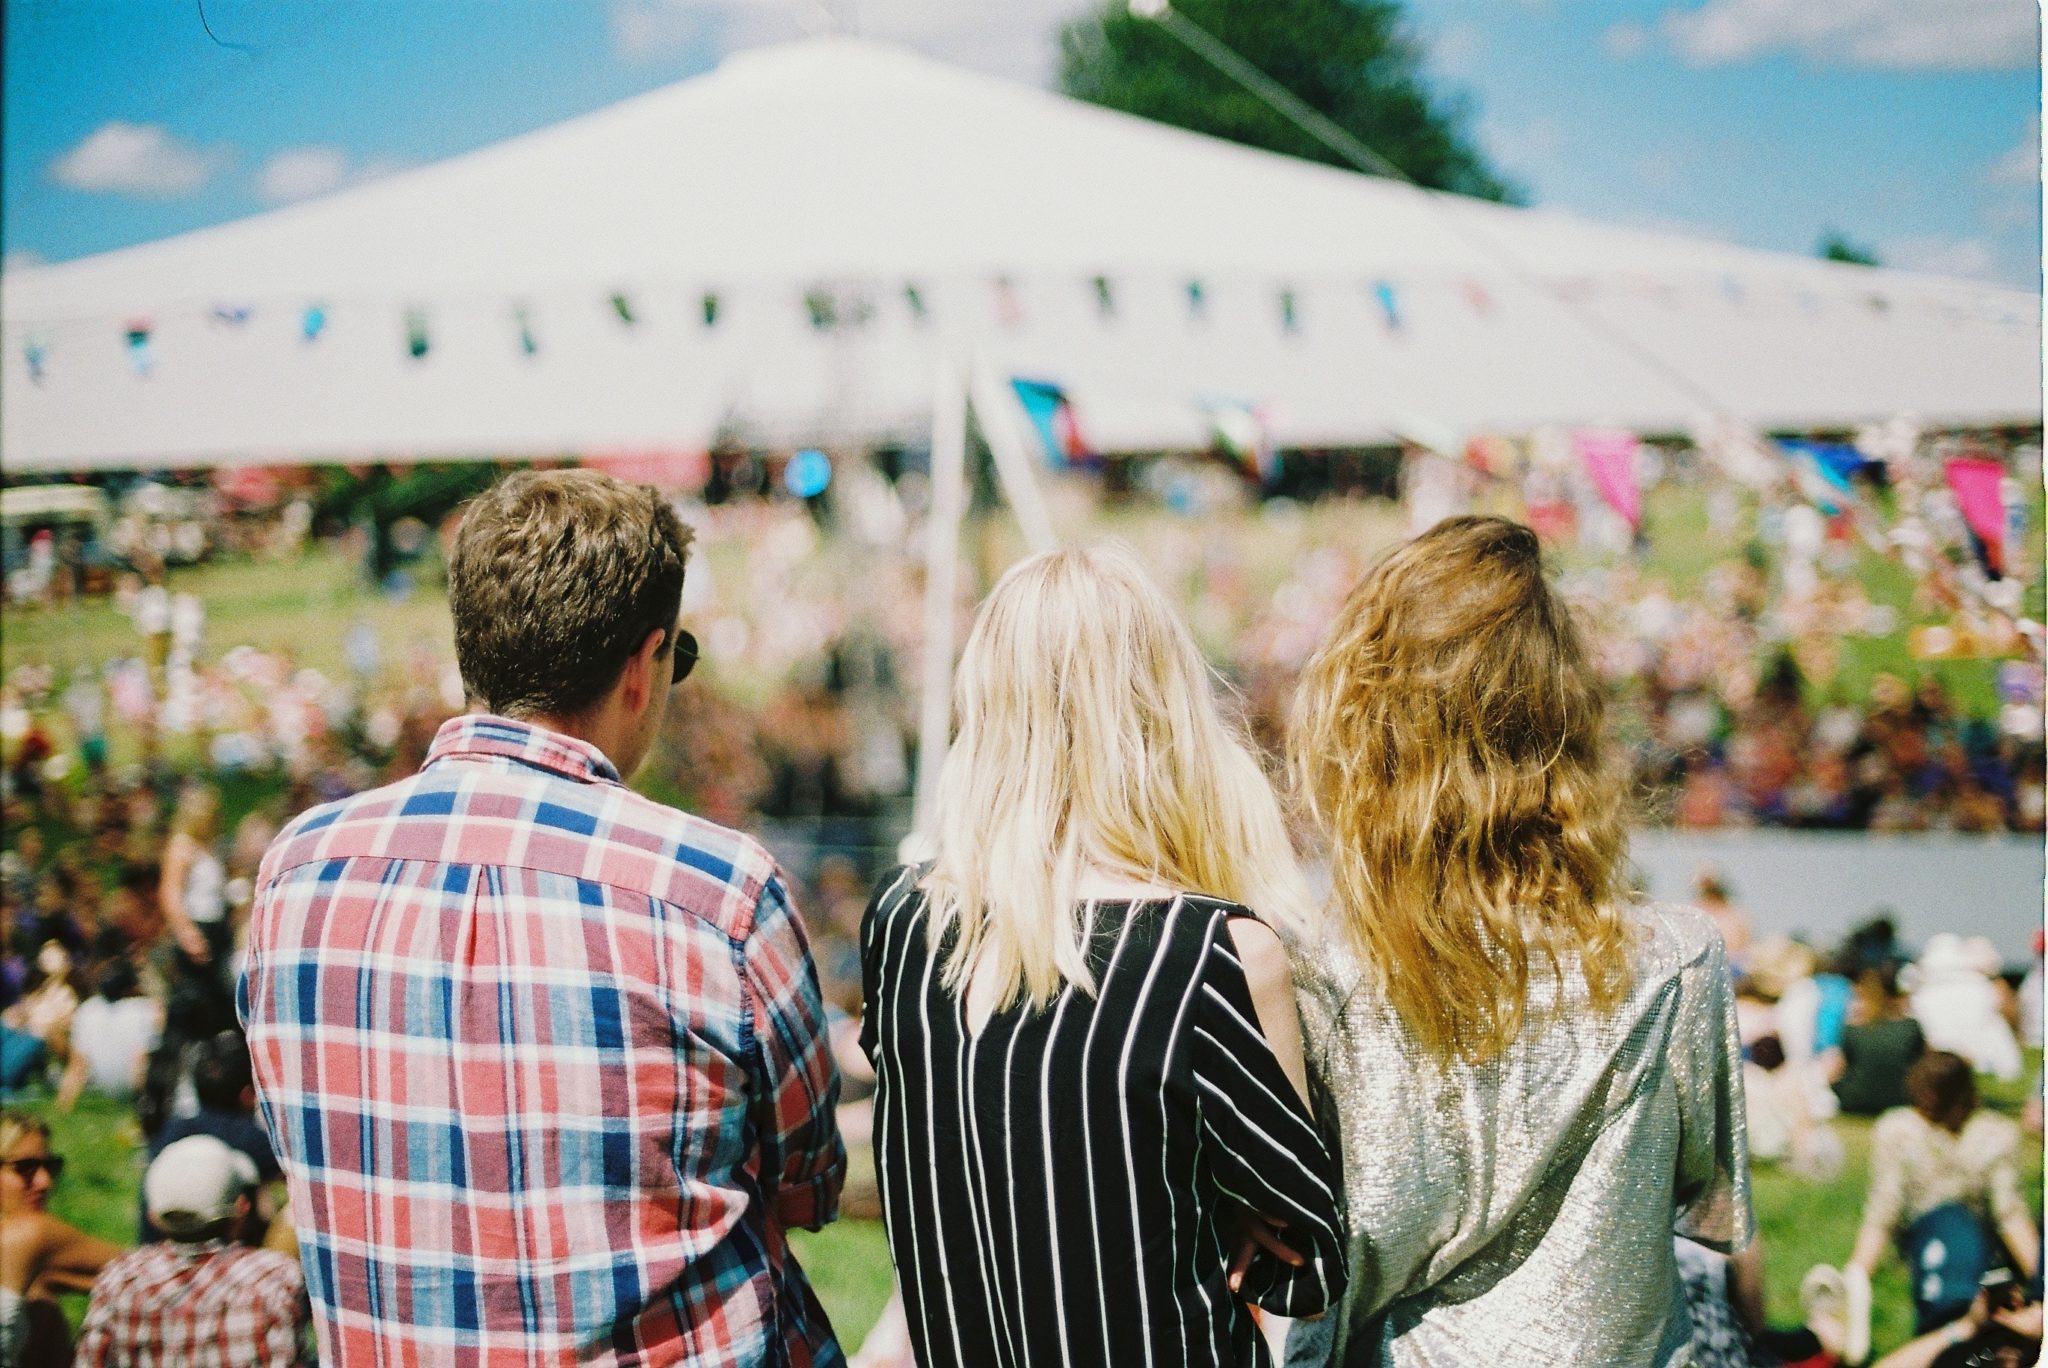 View of outdoor arena from behind three people amongst crowds at festival